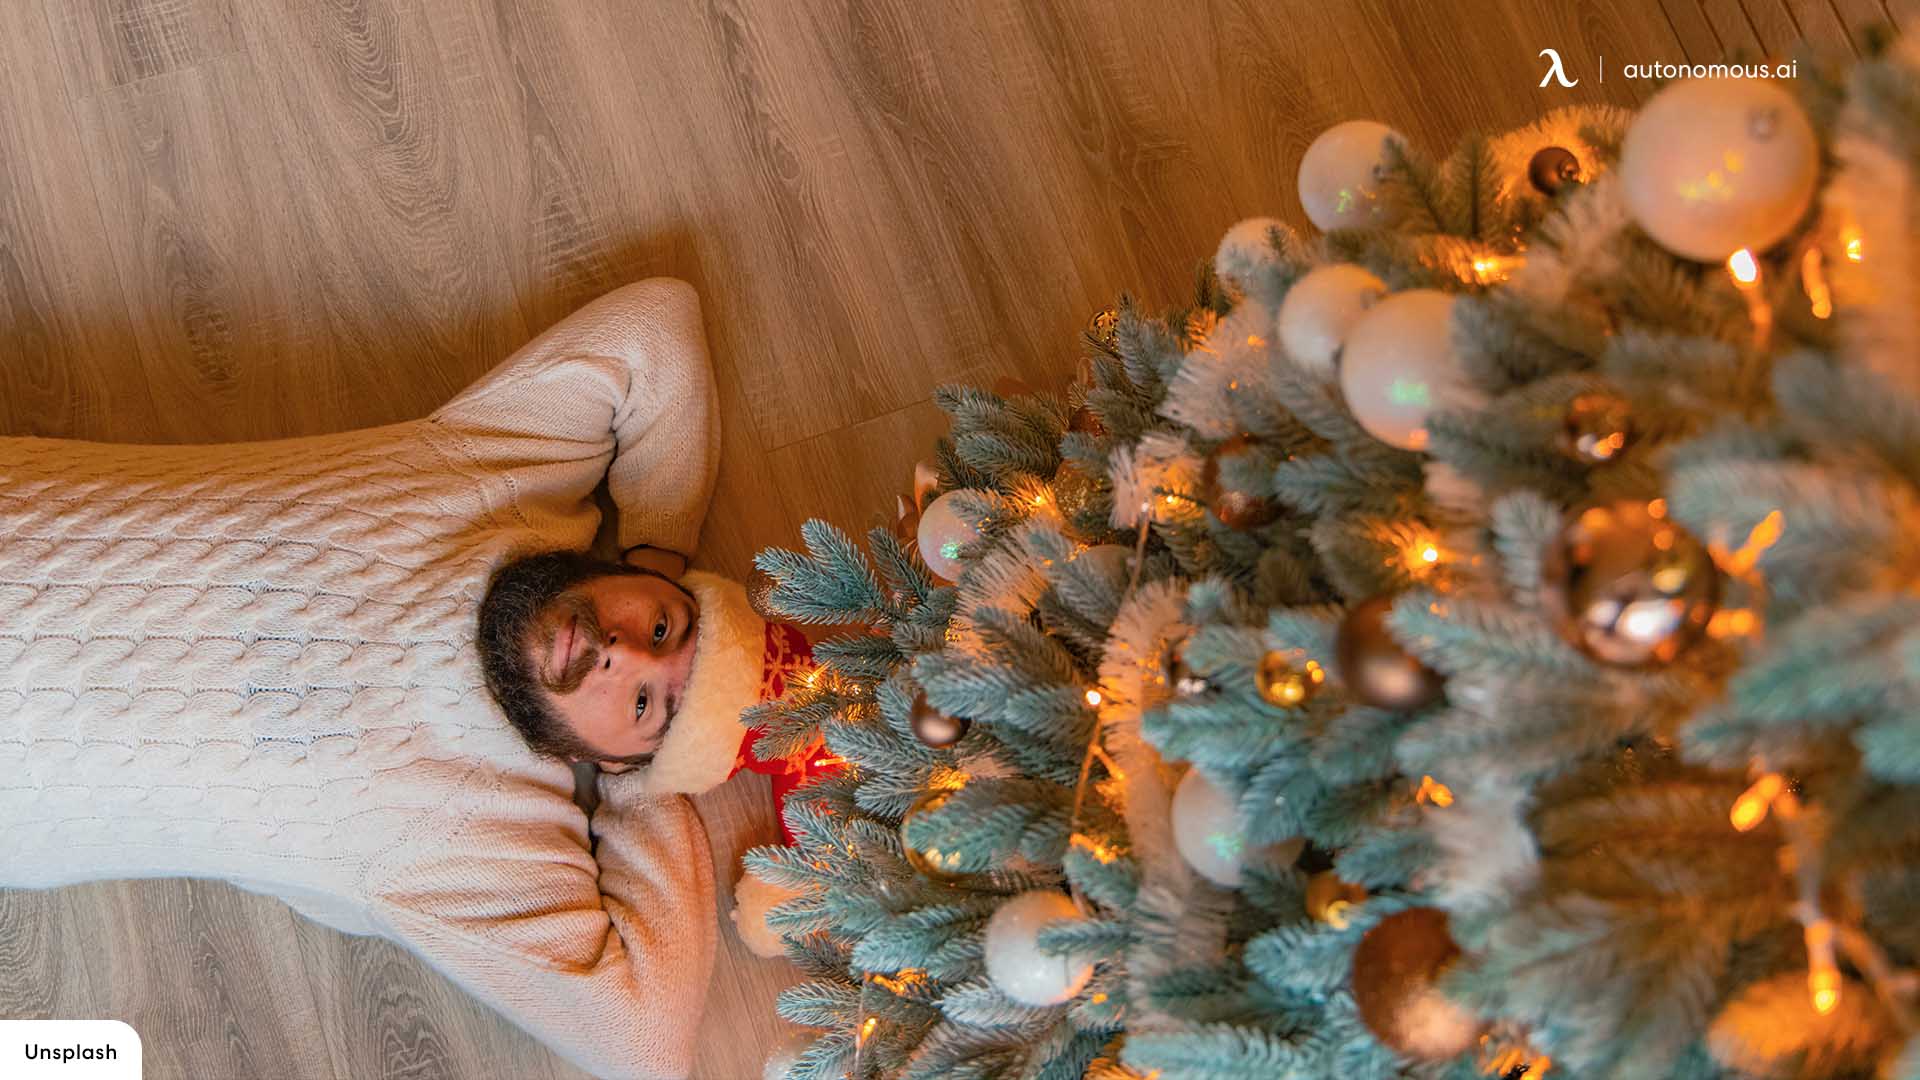 A man lying on the floor next to a Christmas tree - White Christmas, cute Christmas, Christmas